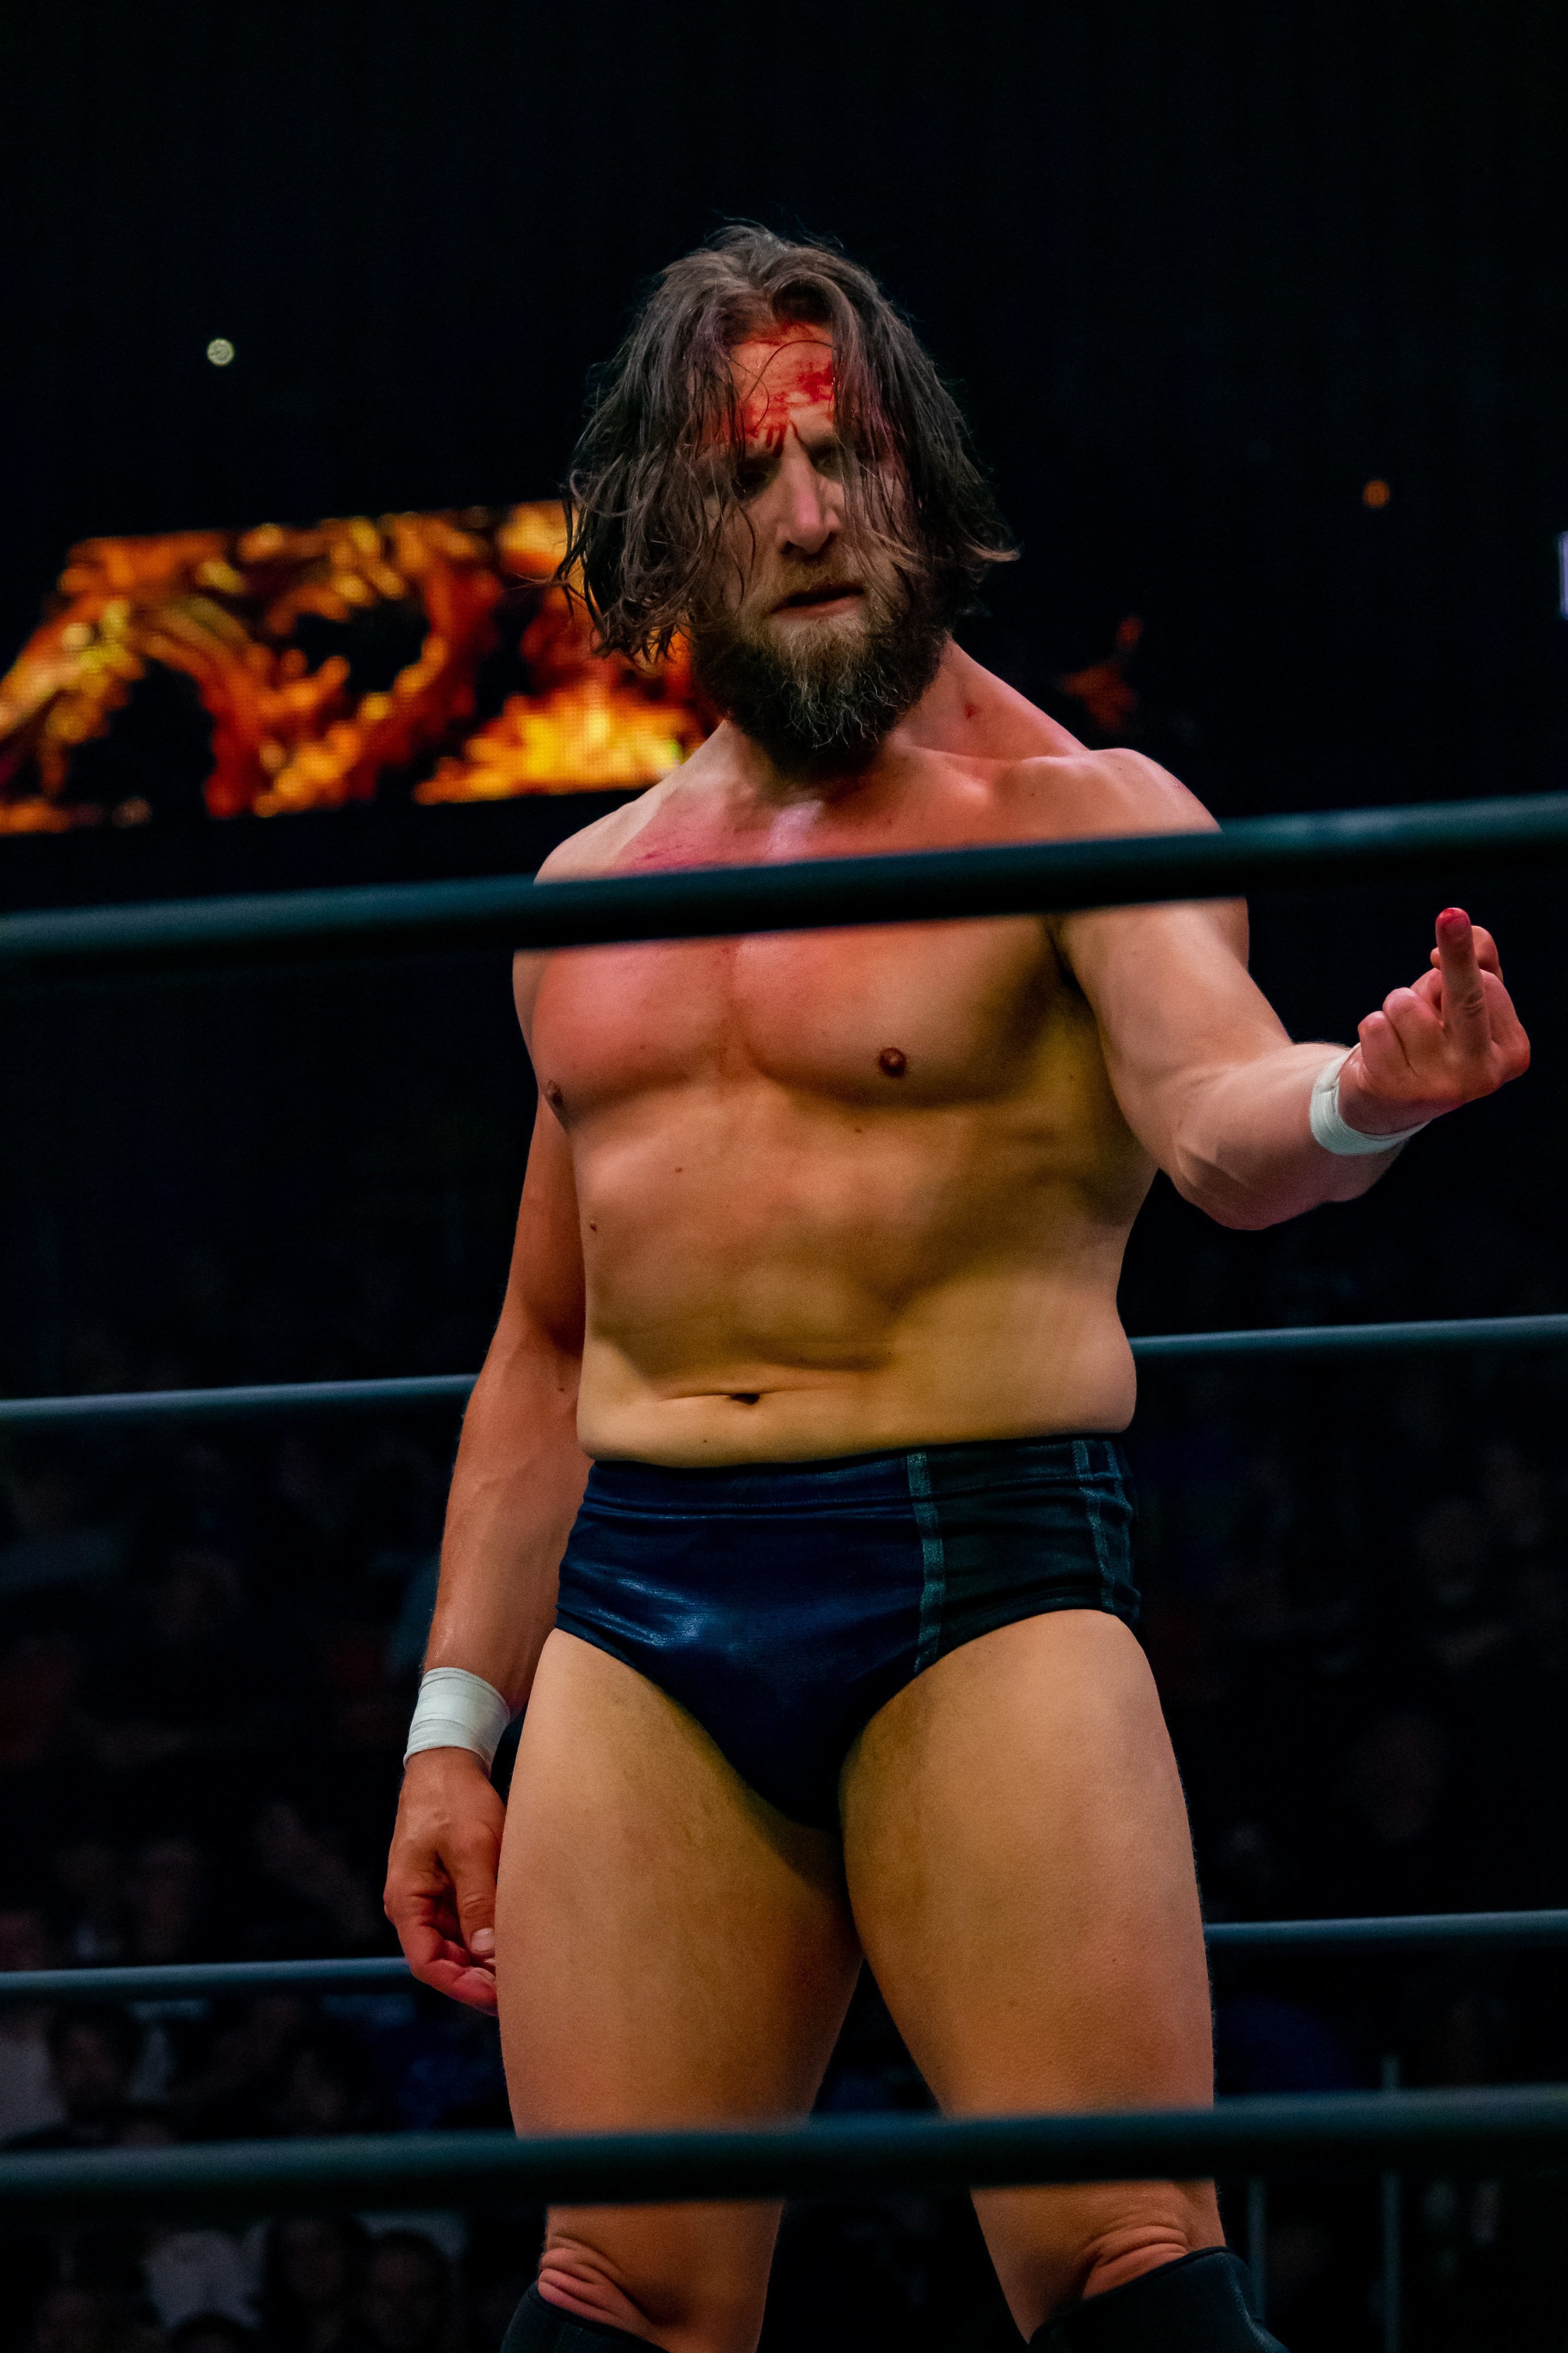 bryan danielson bleeding and pointing his middle finger